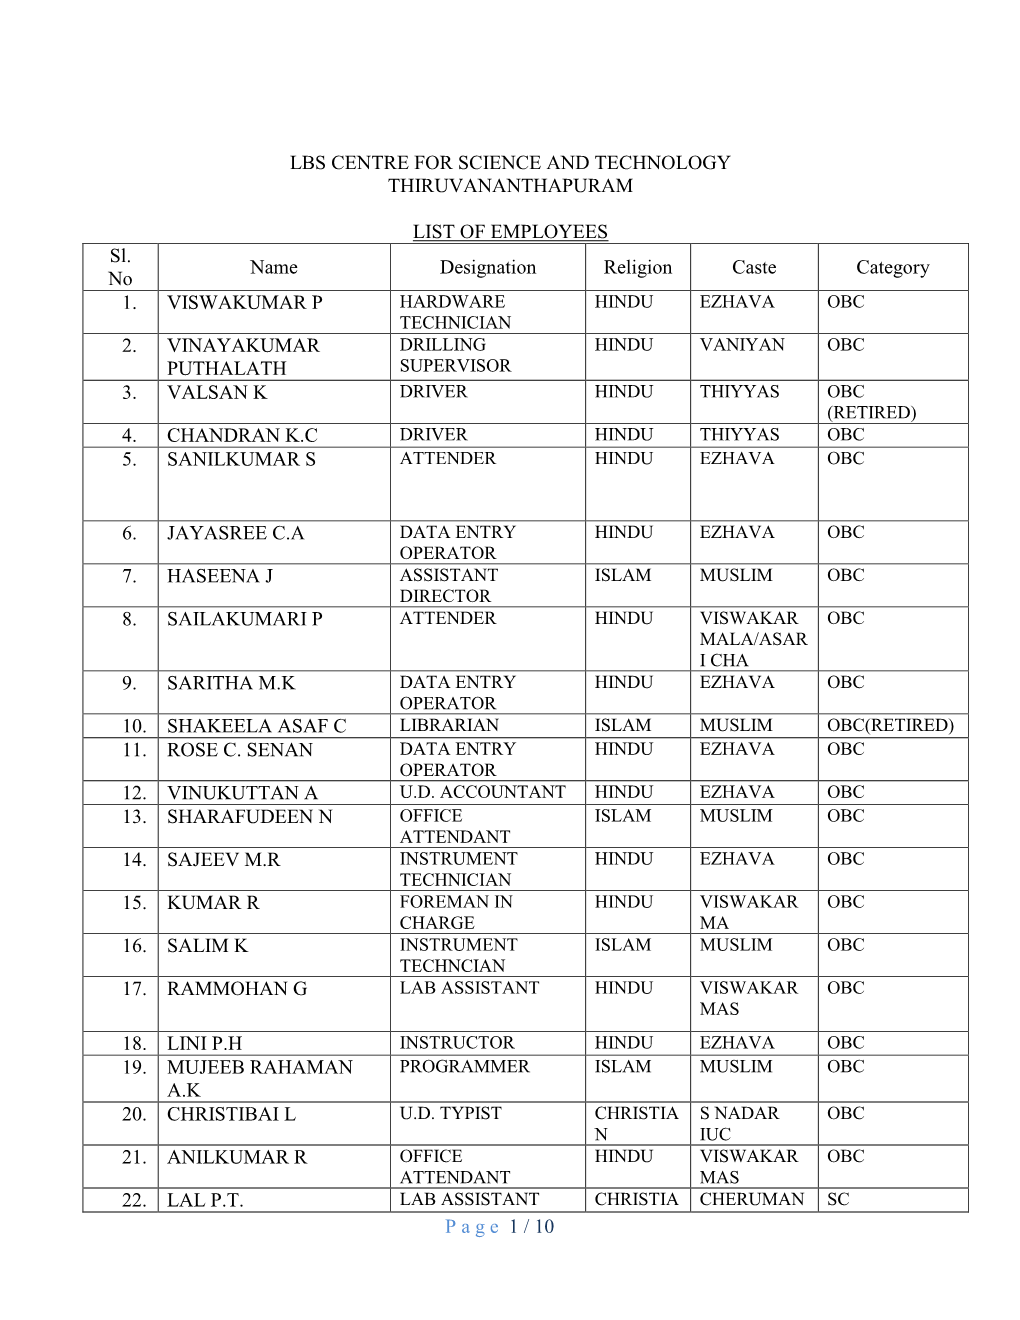 Page 1 / 10 LBS CENTRE for SCIENCE and TECHNOLOGY THIRUVANANTHAPURAM LIST of EMPLOYEES Sl. No Name Designation Religion Caste Ca